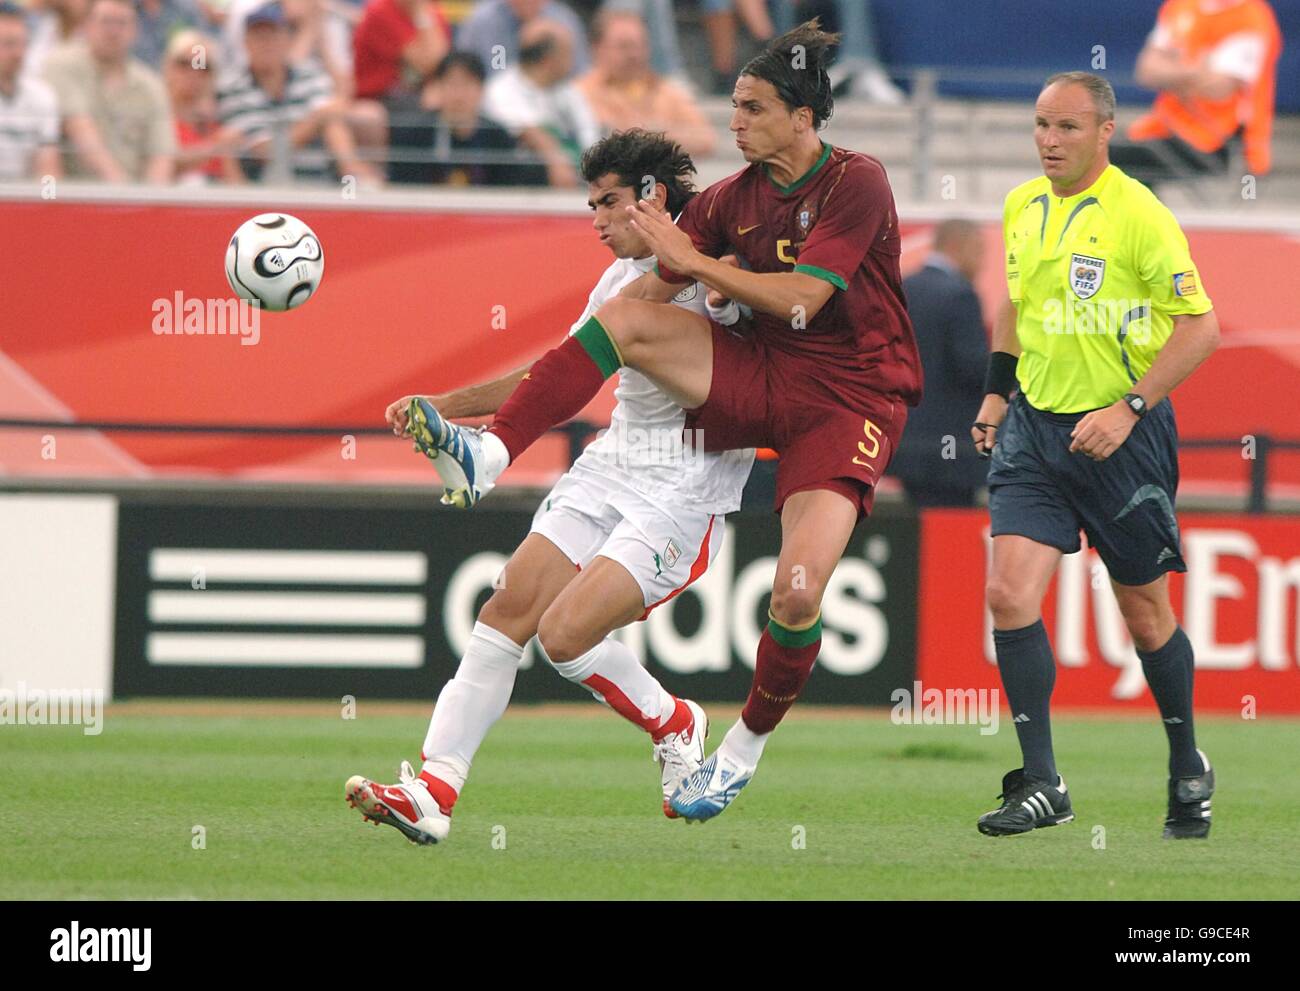 (L-R) Mehrzad Madanchi, Iran and Fernando Meira, Portugal battle for the ball Stock Photo